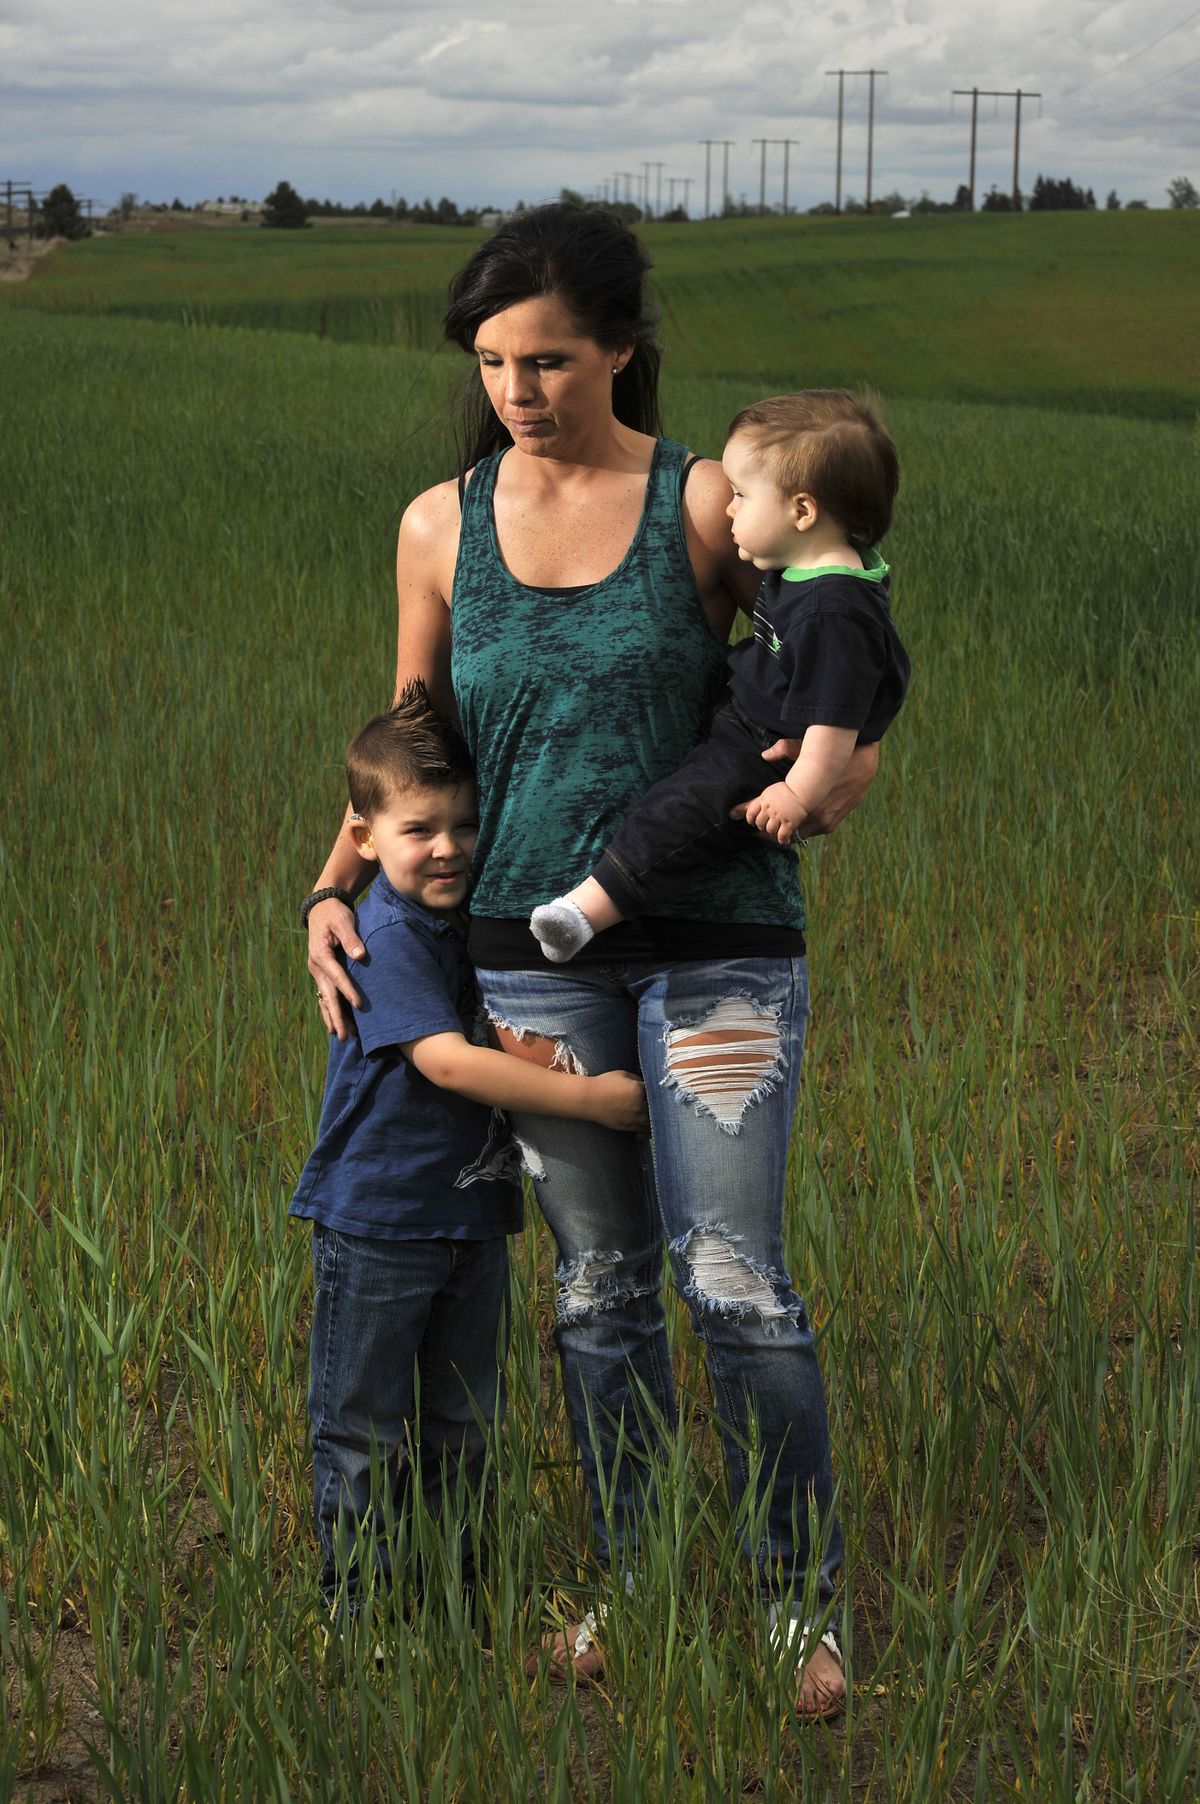 Crystal Scott, pictured with her sons Aedan, 4, and Roman, 1, has been at the center of a controversy after two airmen at Fairchild Air Force Base posed for photos of them breast-feeding in uniform. (Colin Mulvany)